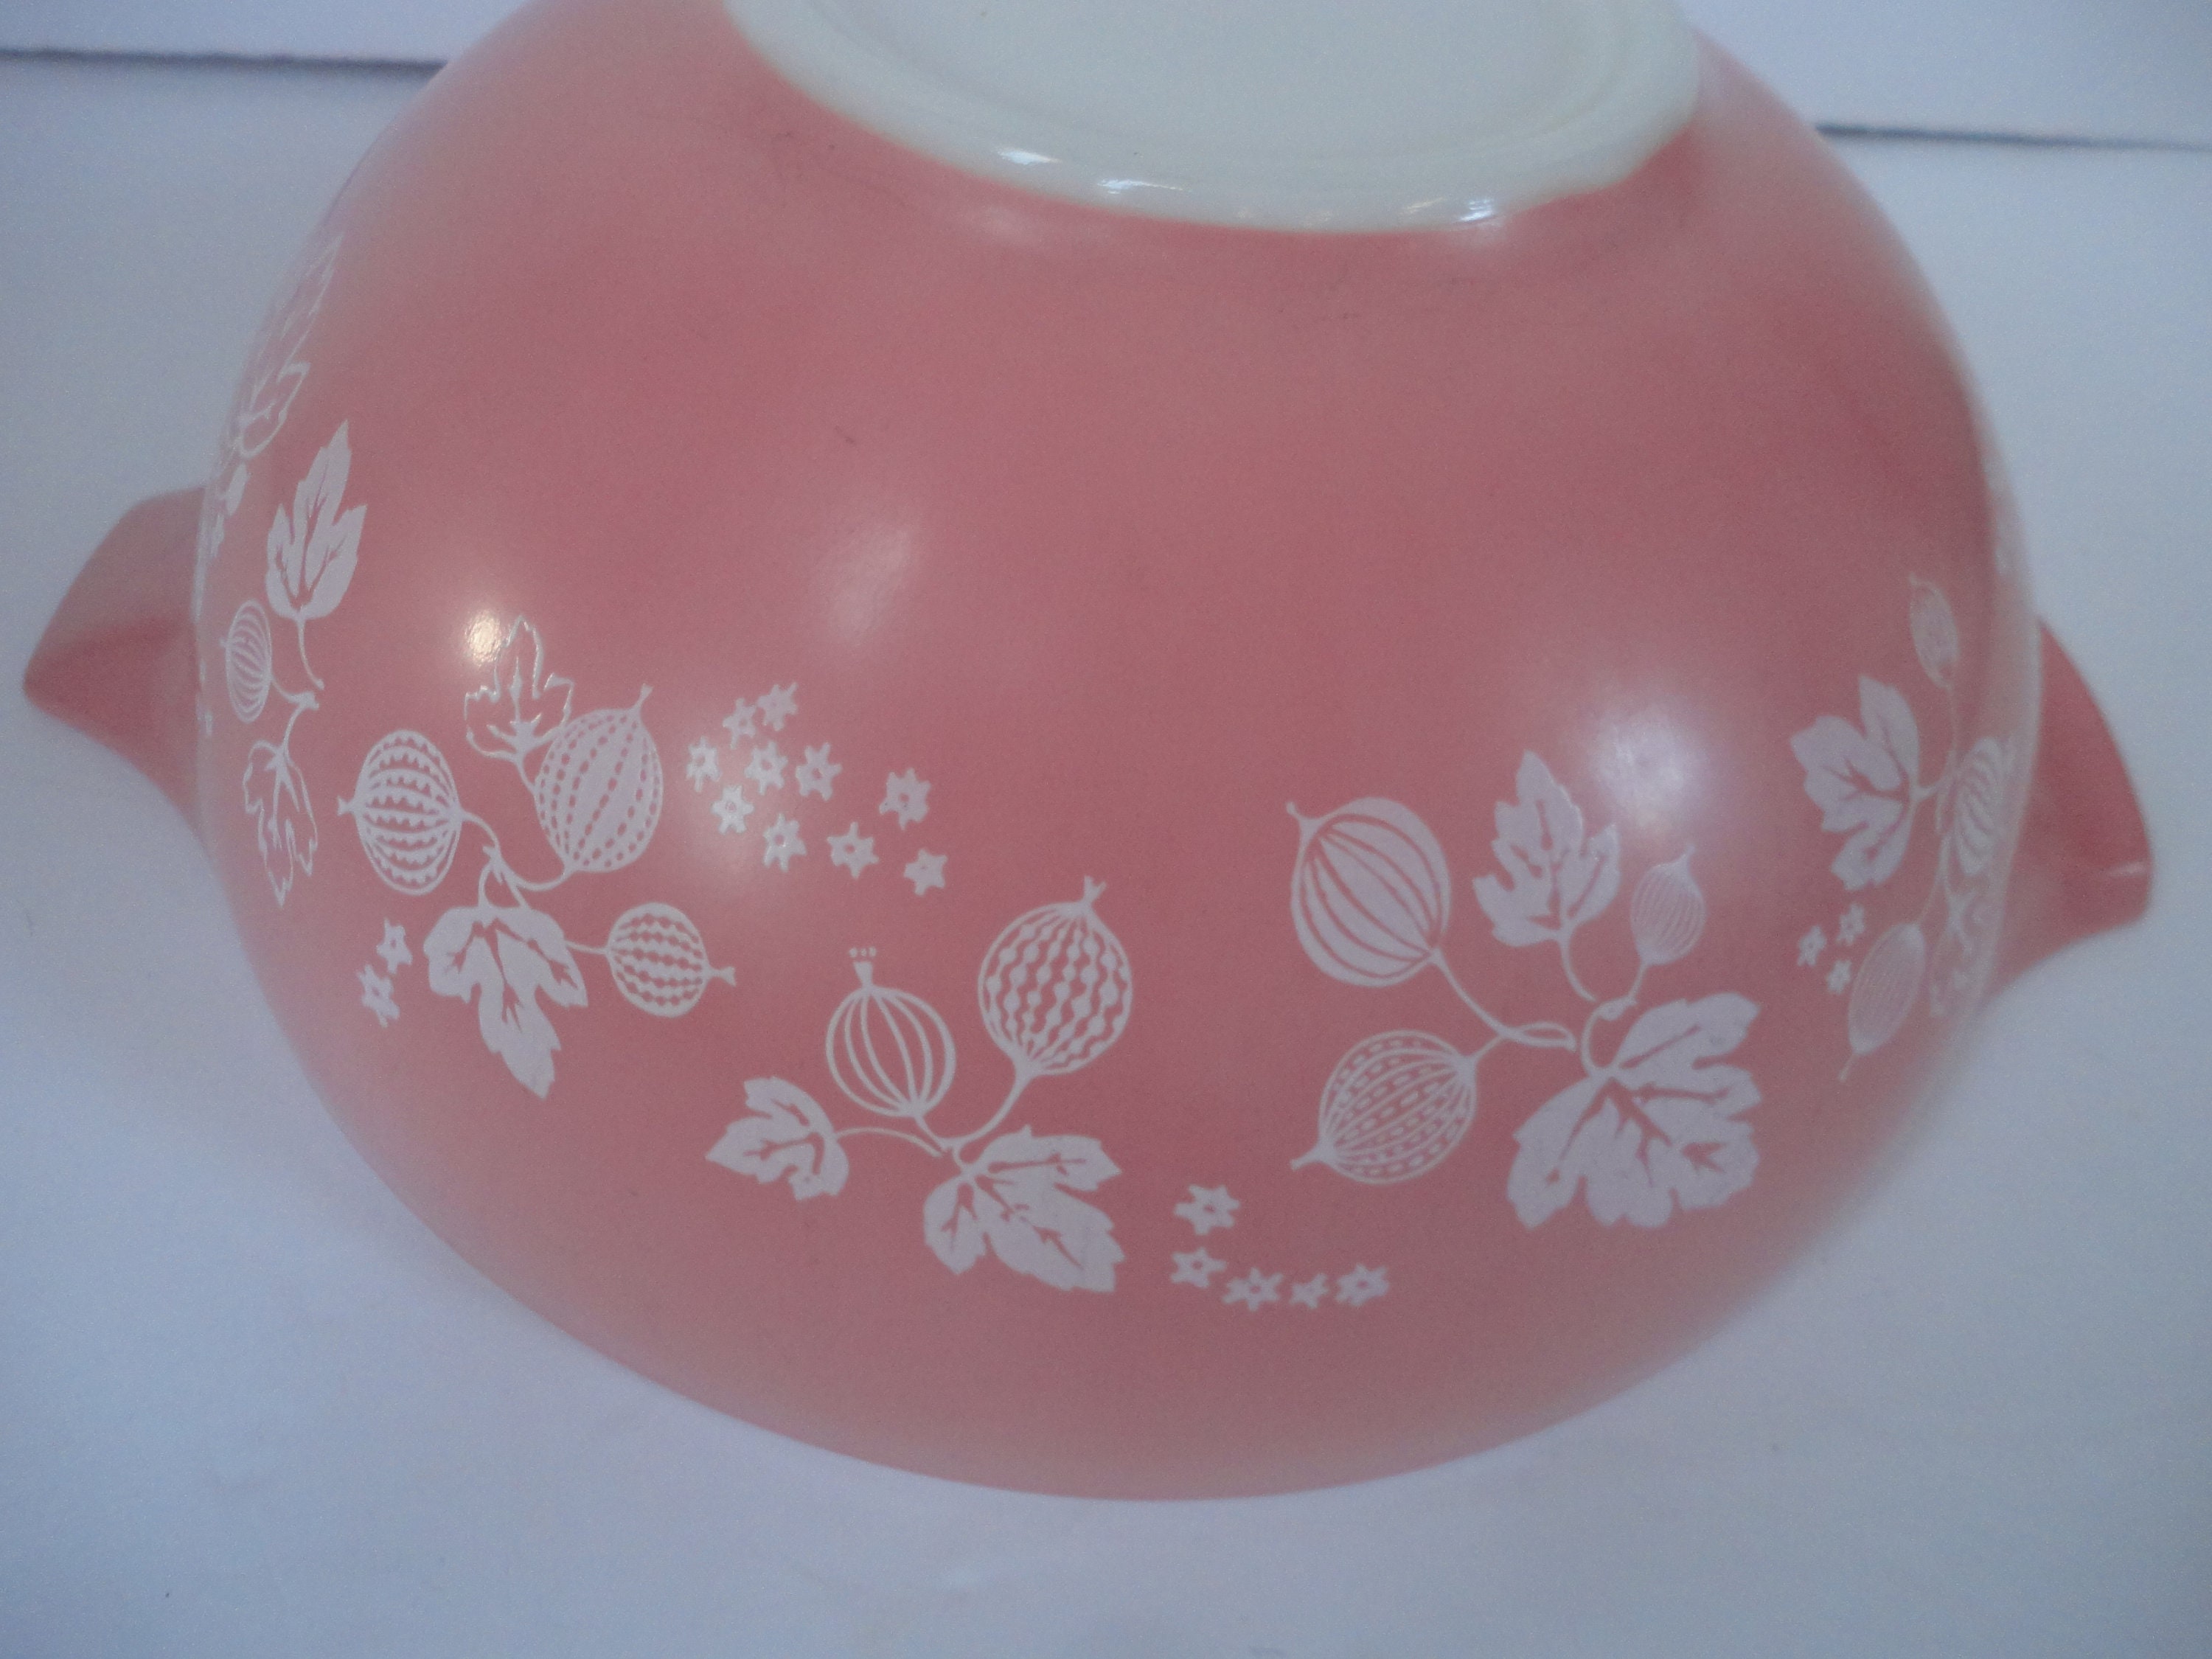 Pyrex and Pink Daisies: Midcentury cookware is fab again